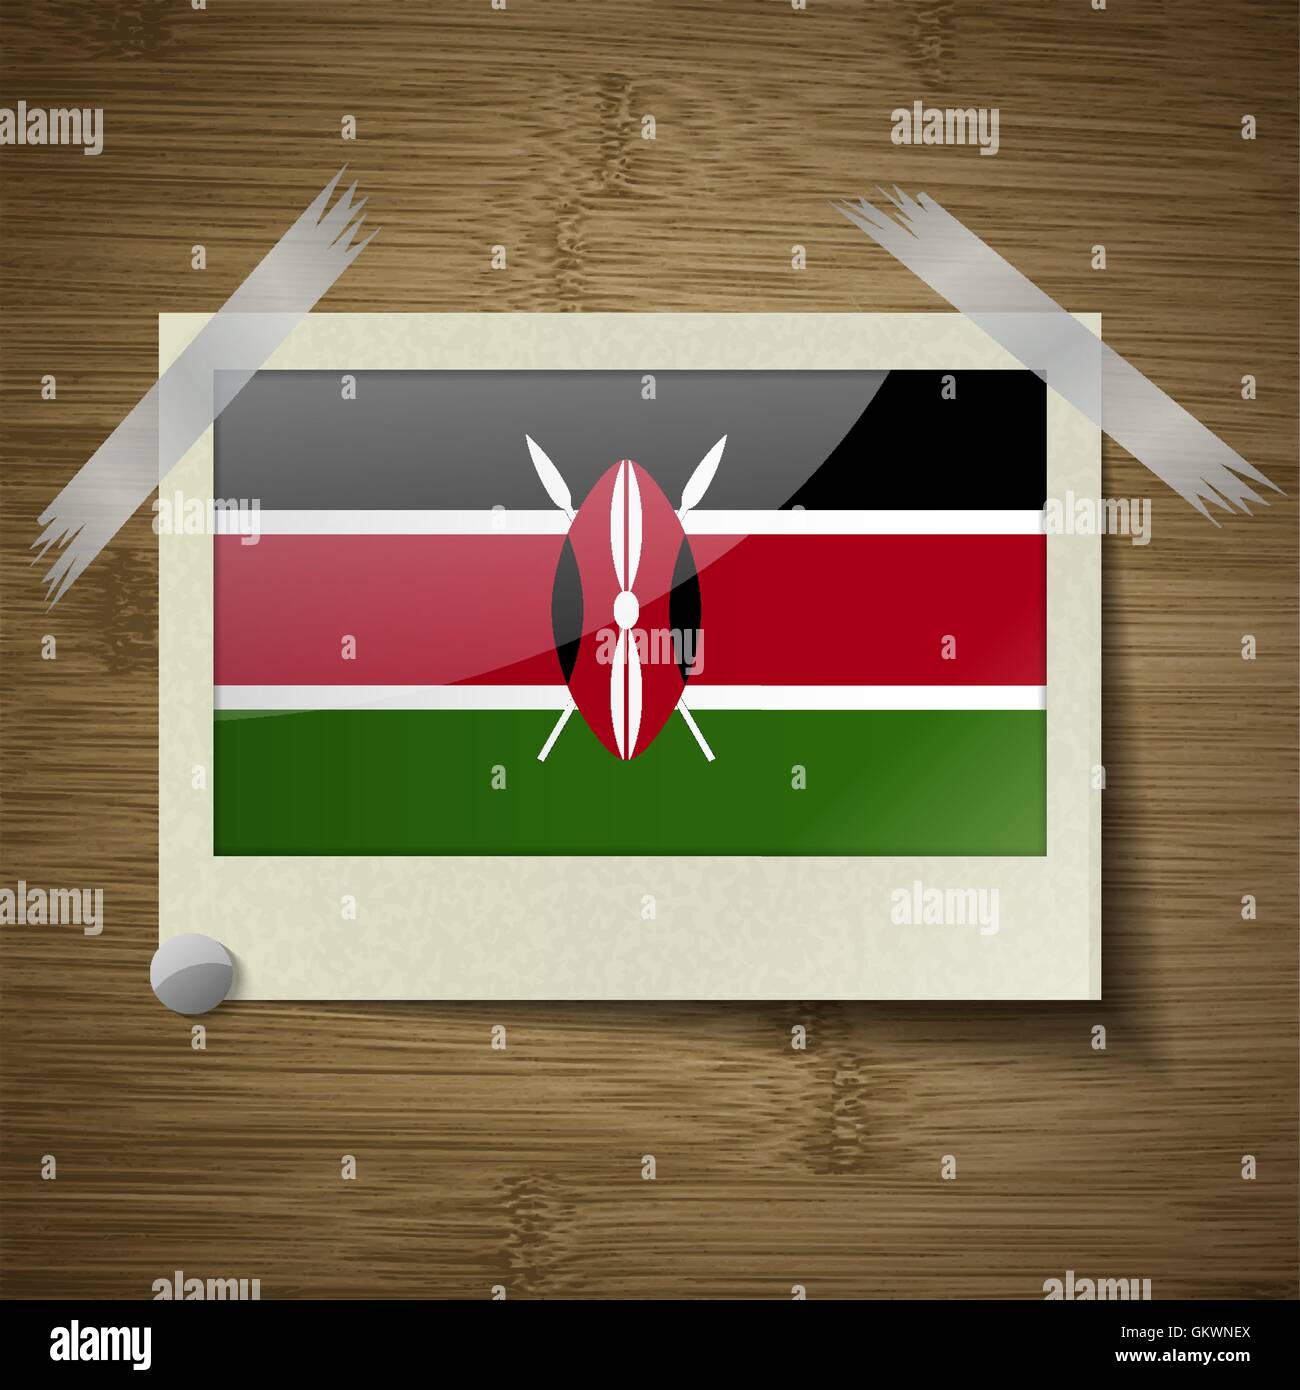 Flags Kenya at frame on wooden texture. Vector Stock Vector